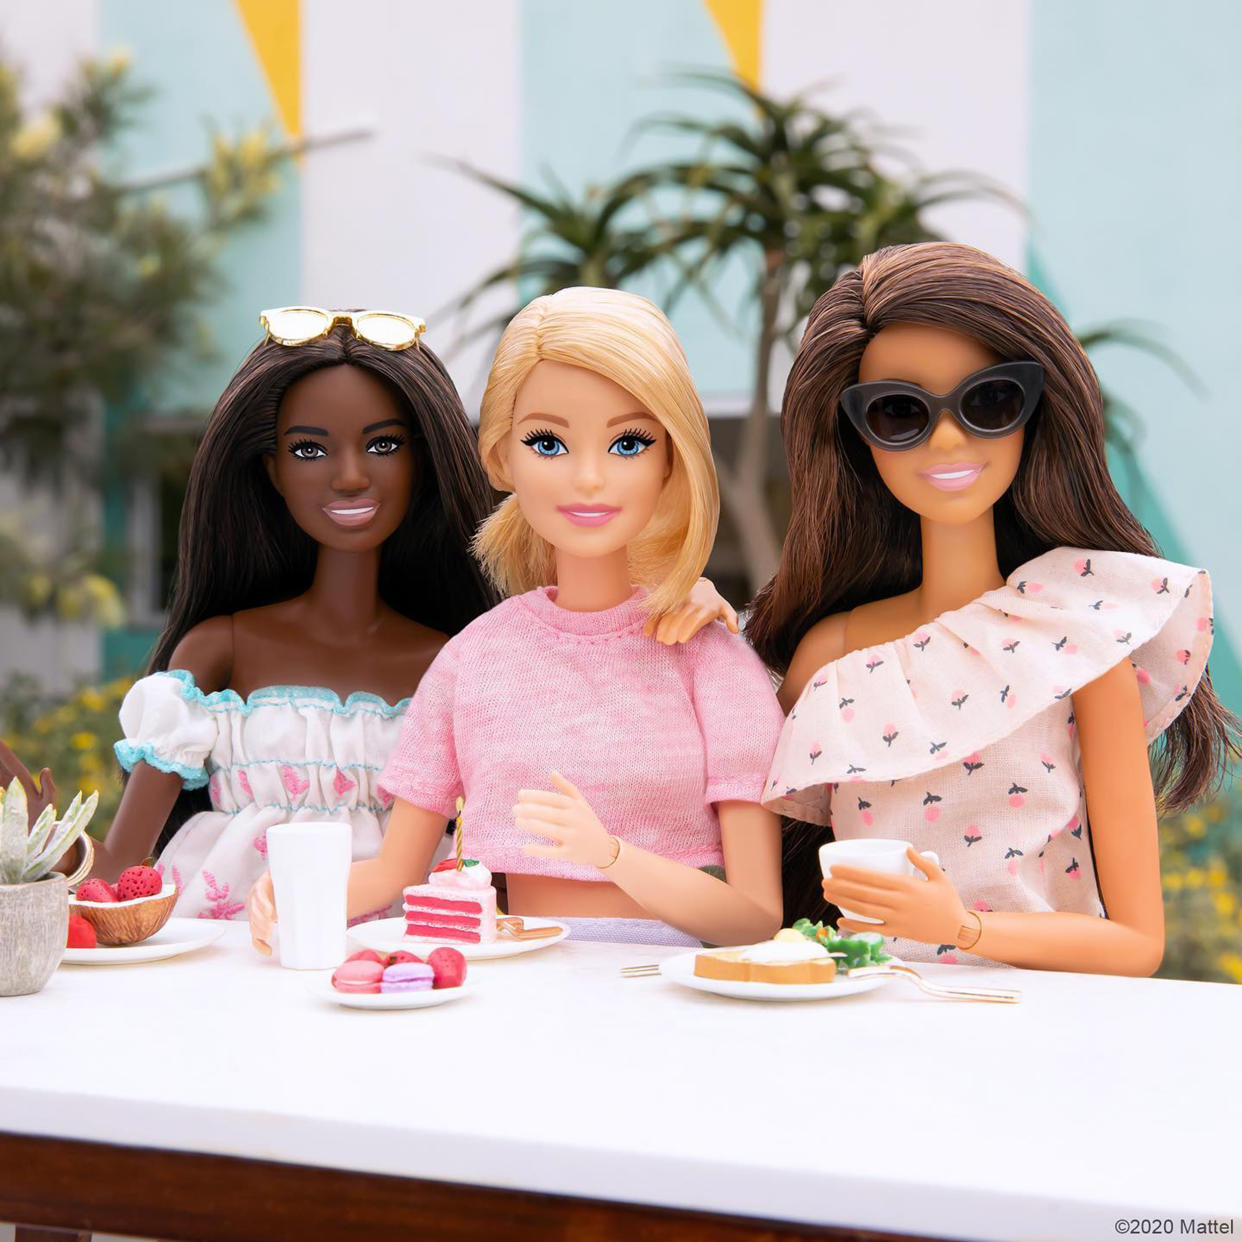 When the girls day makes it out of the groupchat. (@barbiecafeofficial via Instagram)